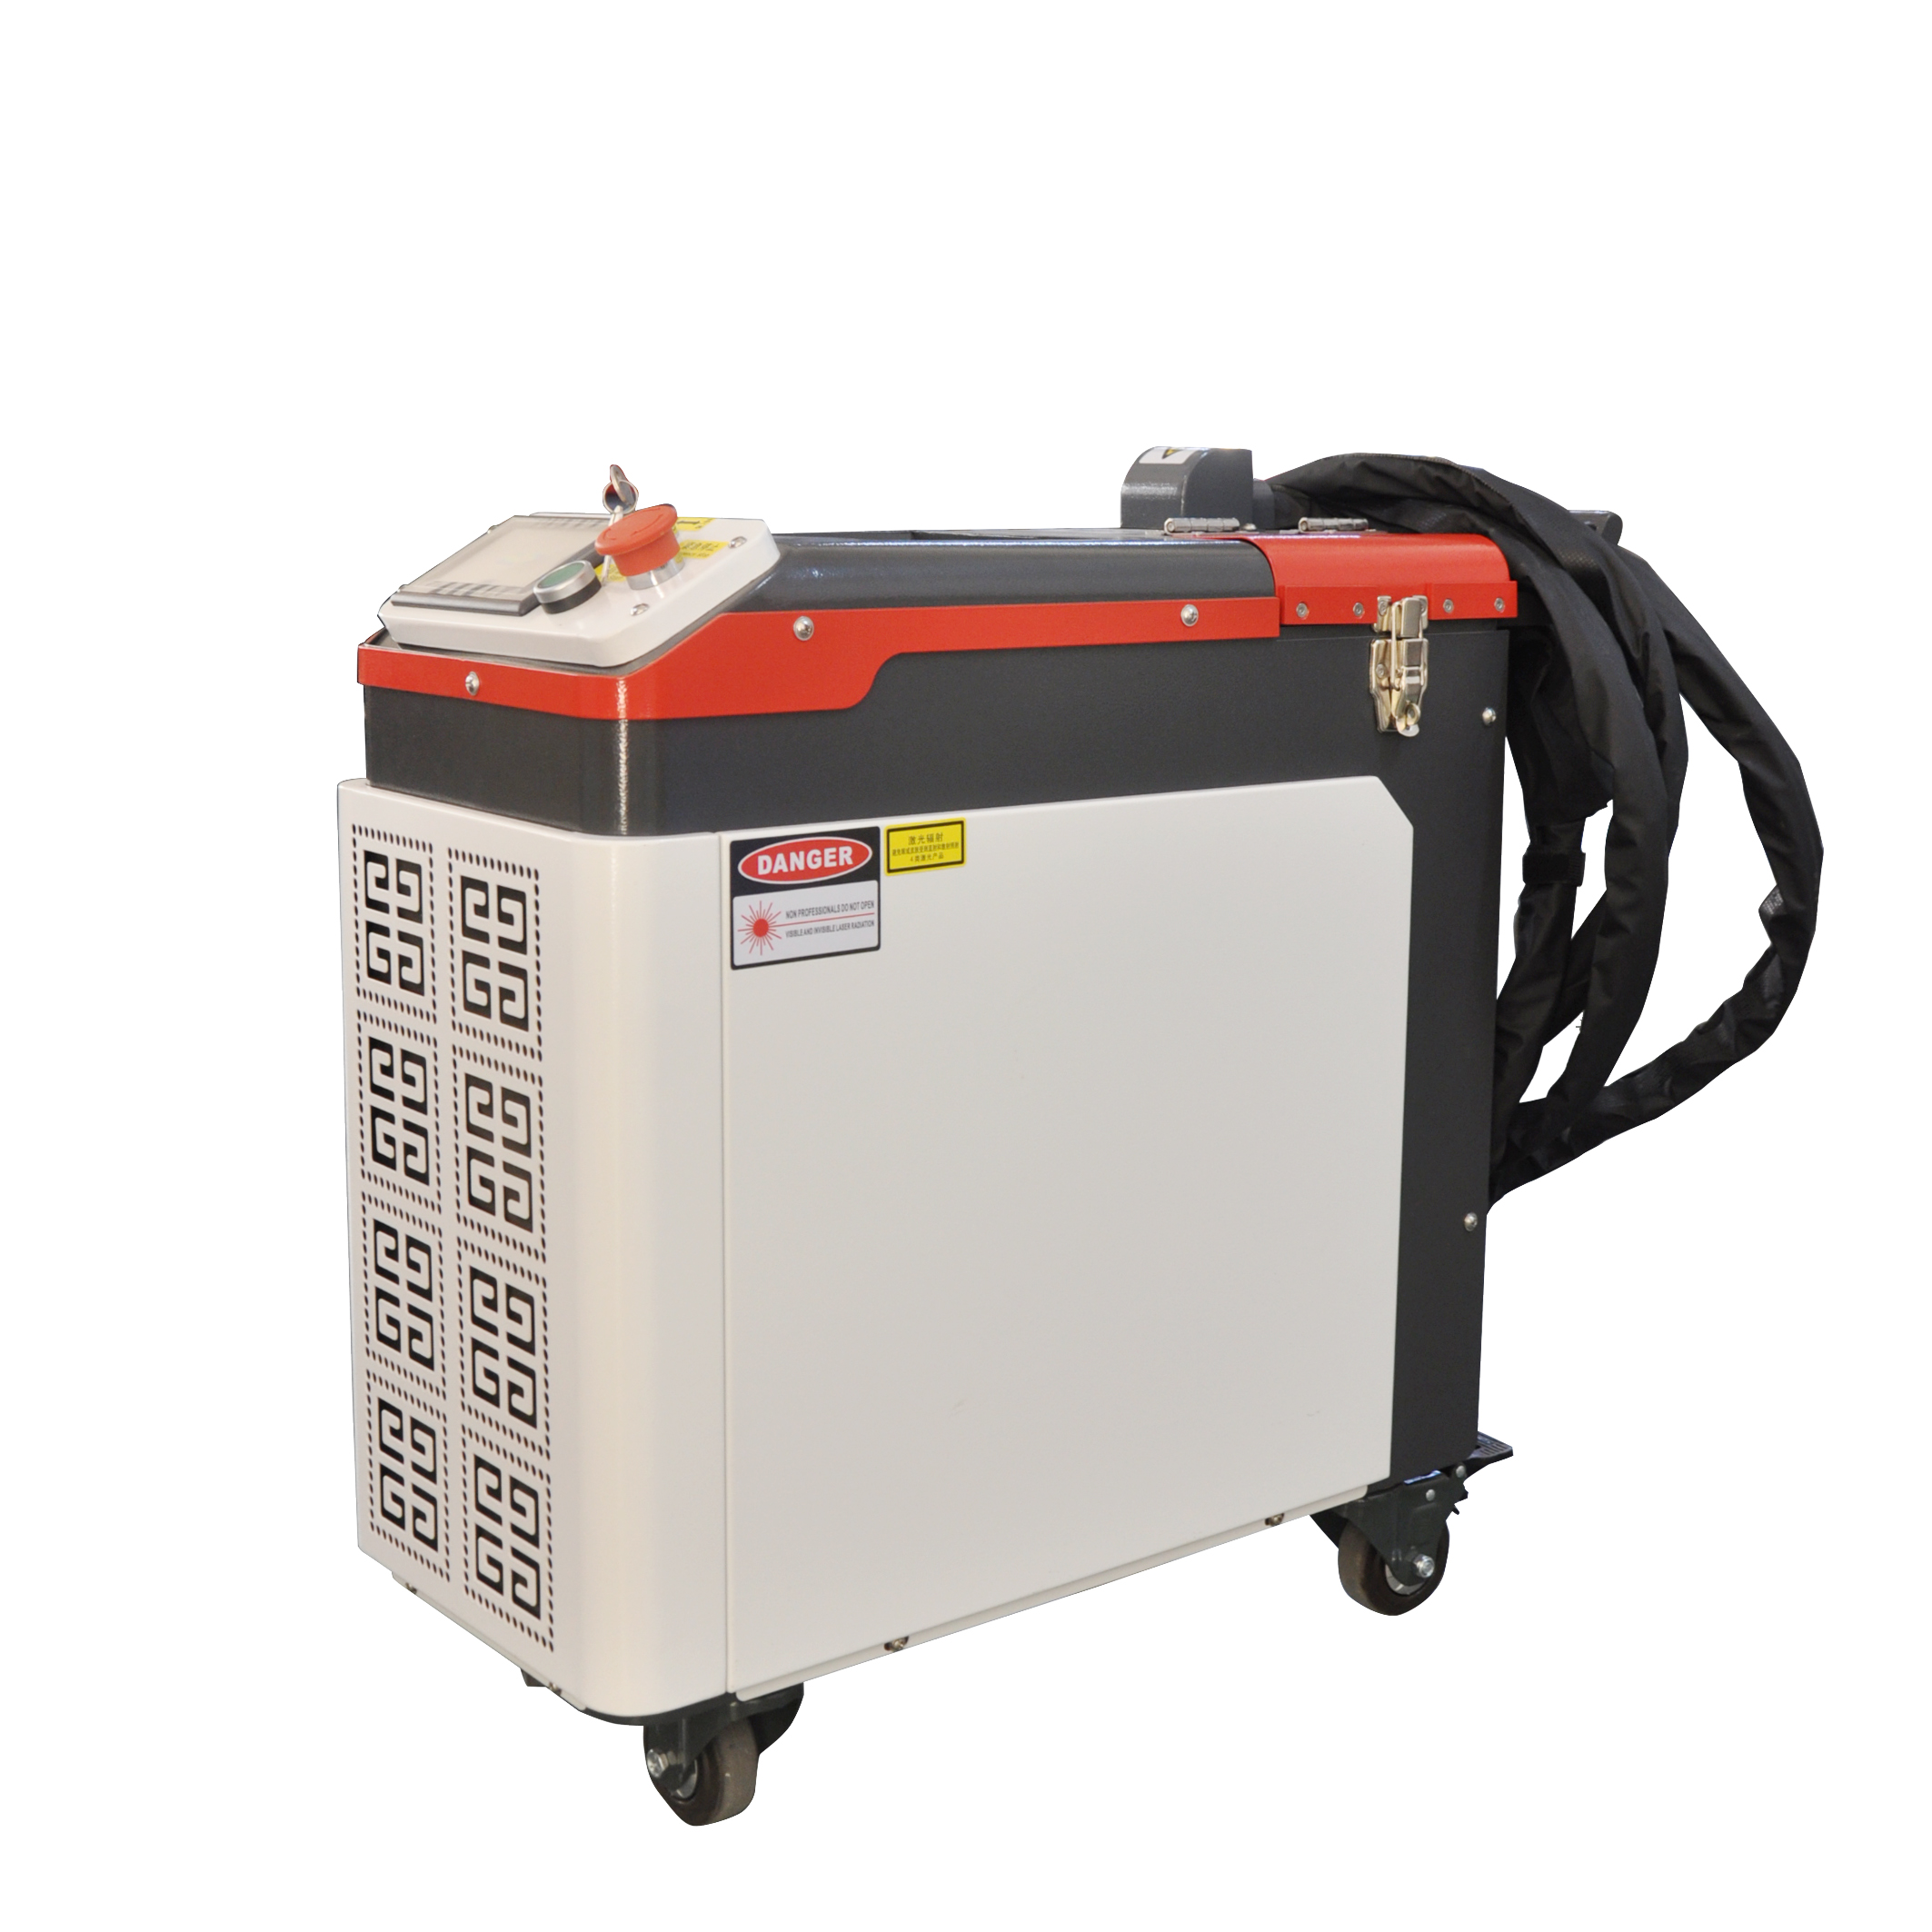 100W Portable Pulse Laser Rust Removal Machine for Paint